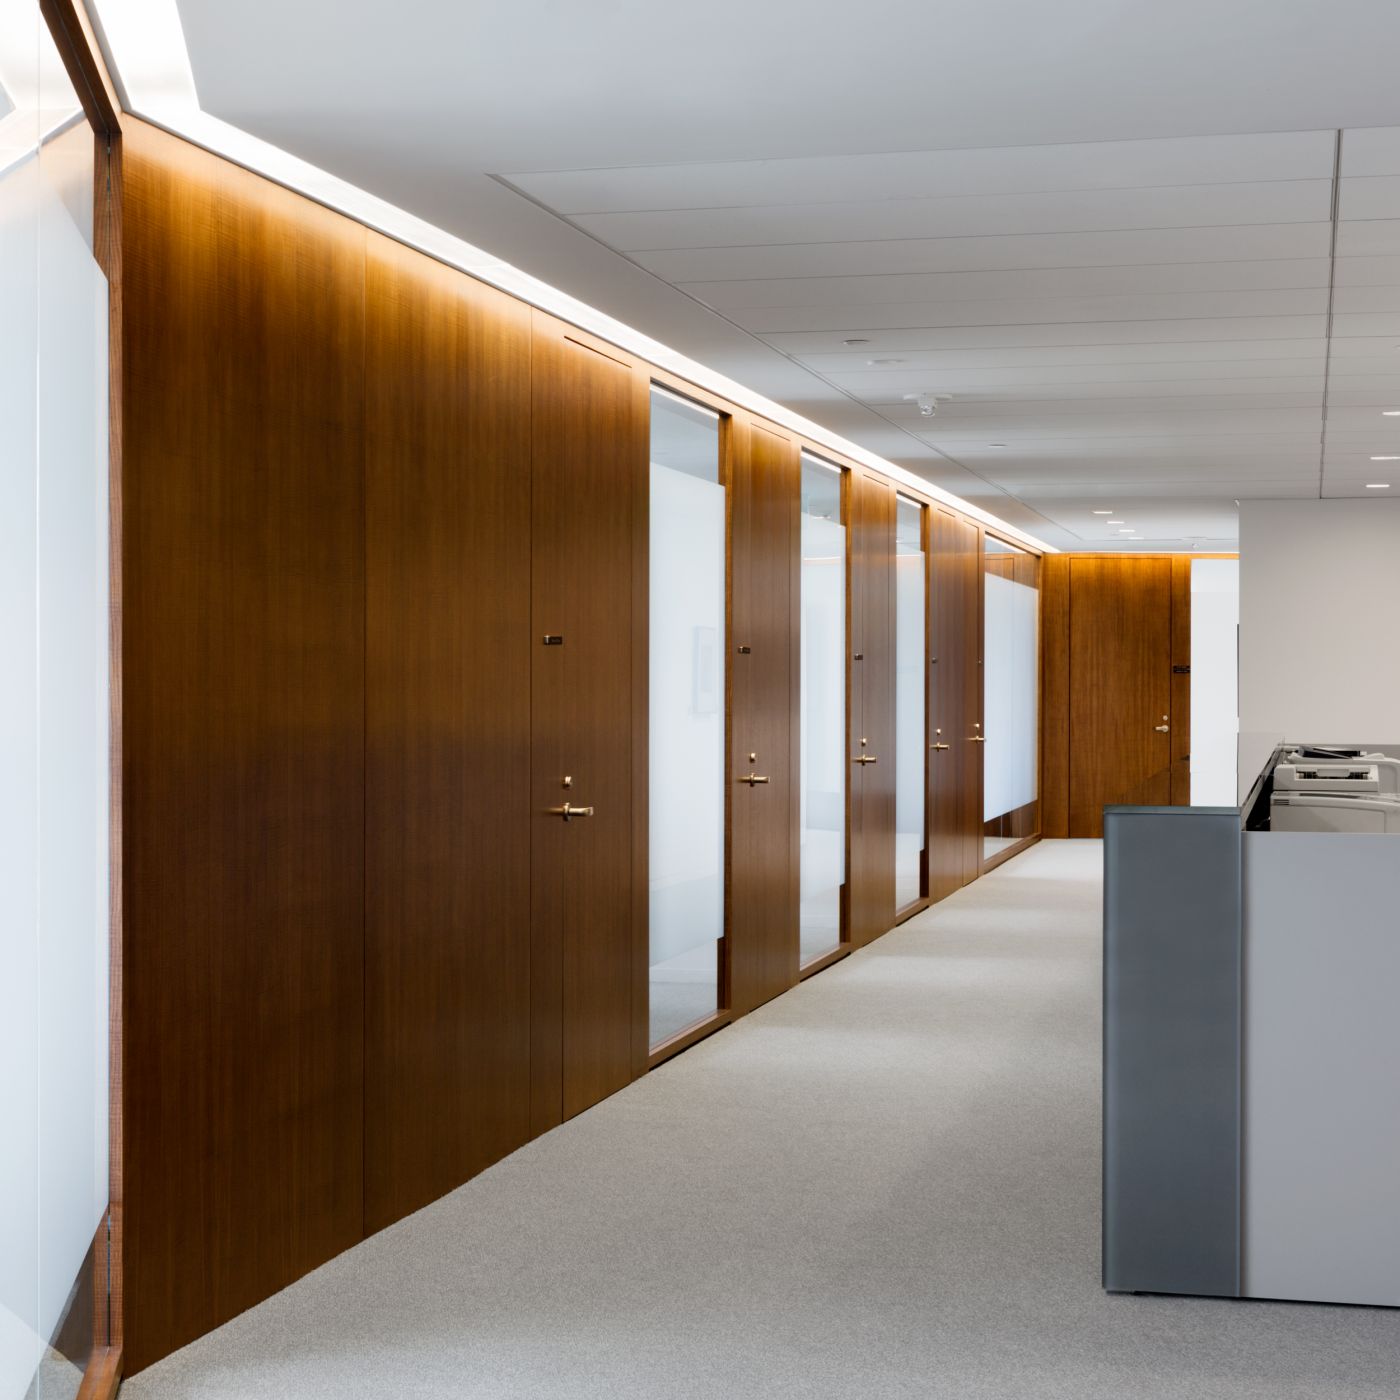 HALCON also provided custom-designed administrative stations in glass and laminate.